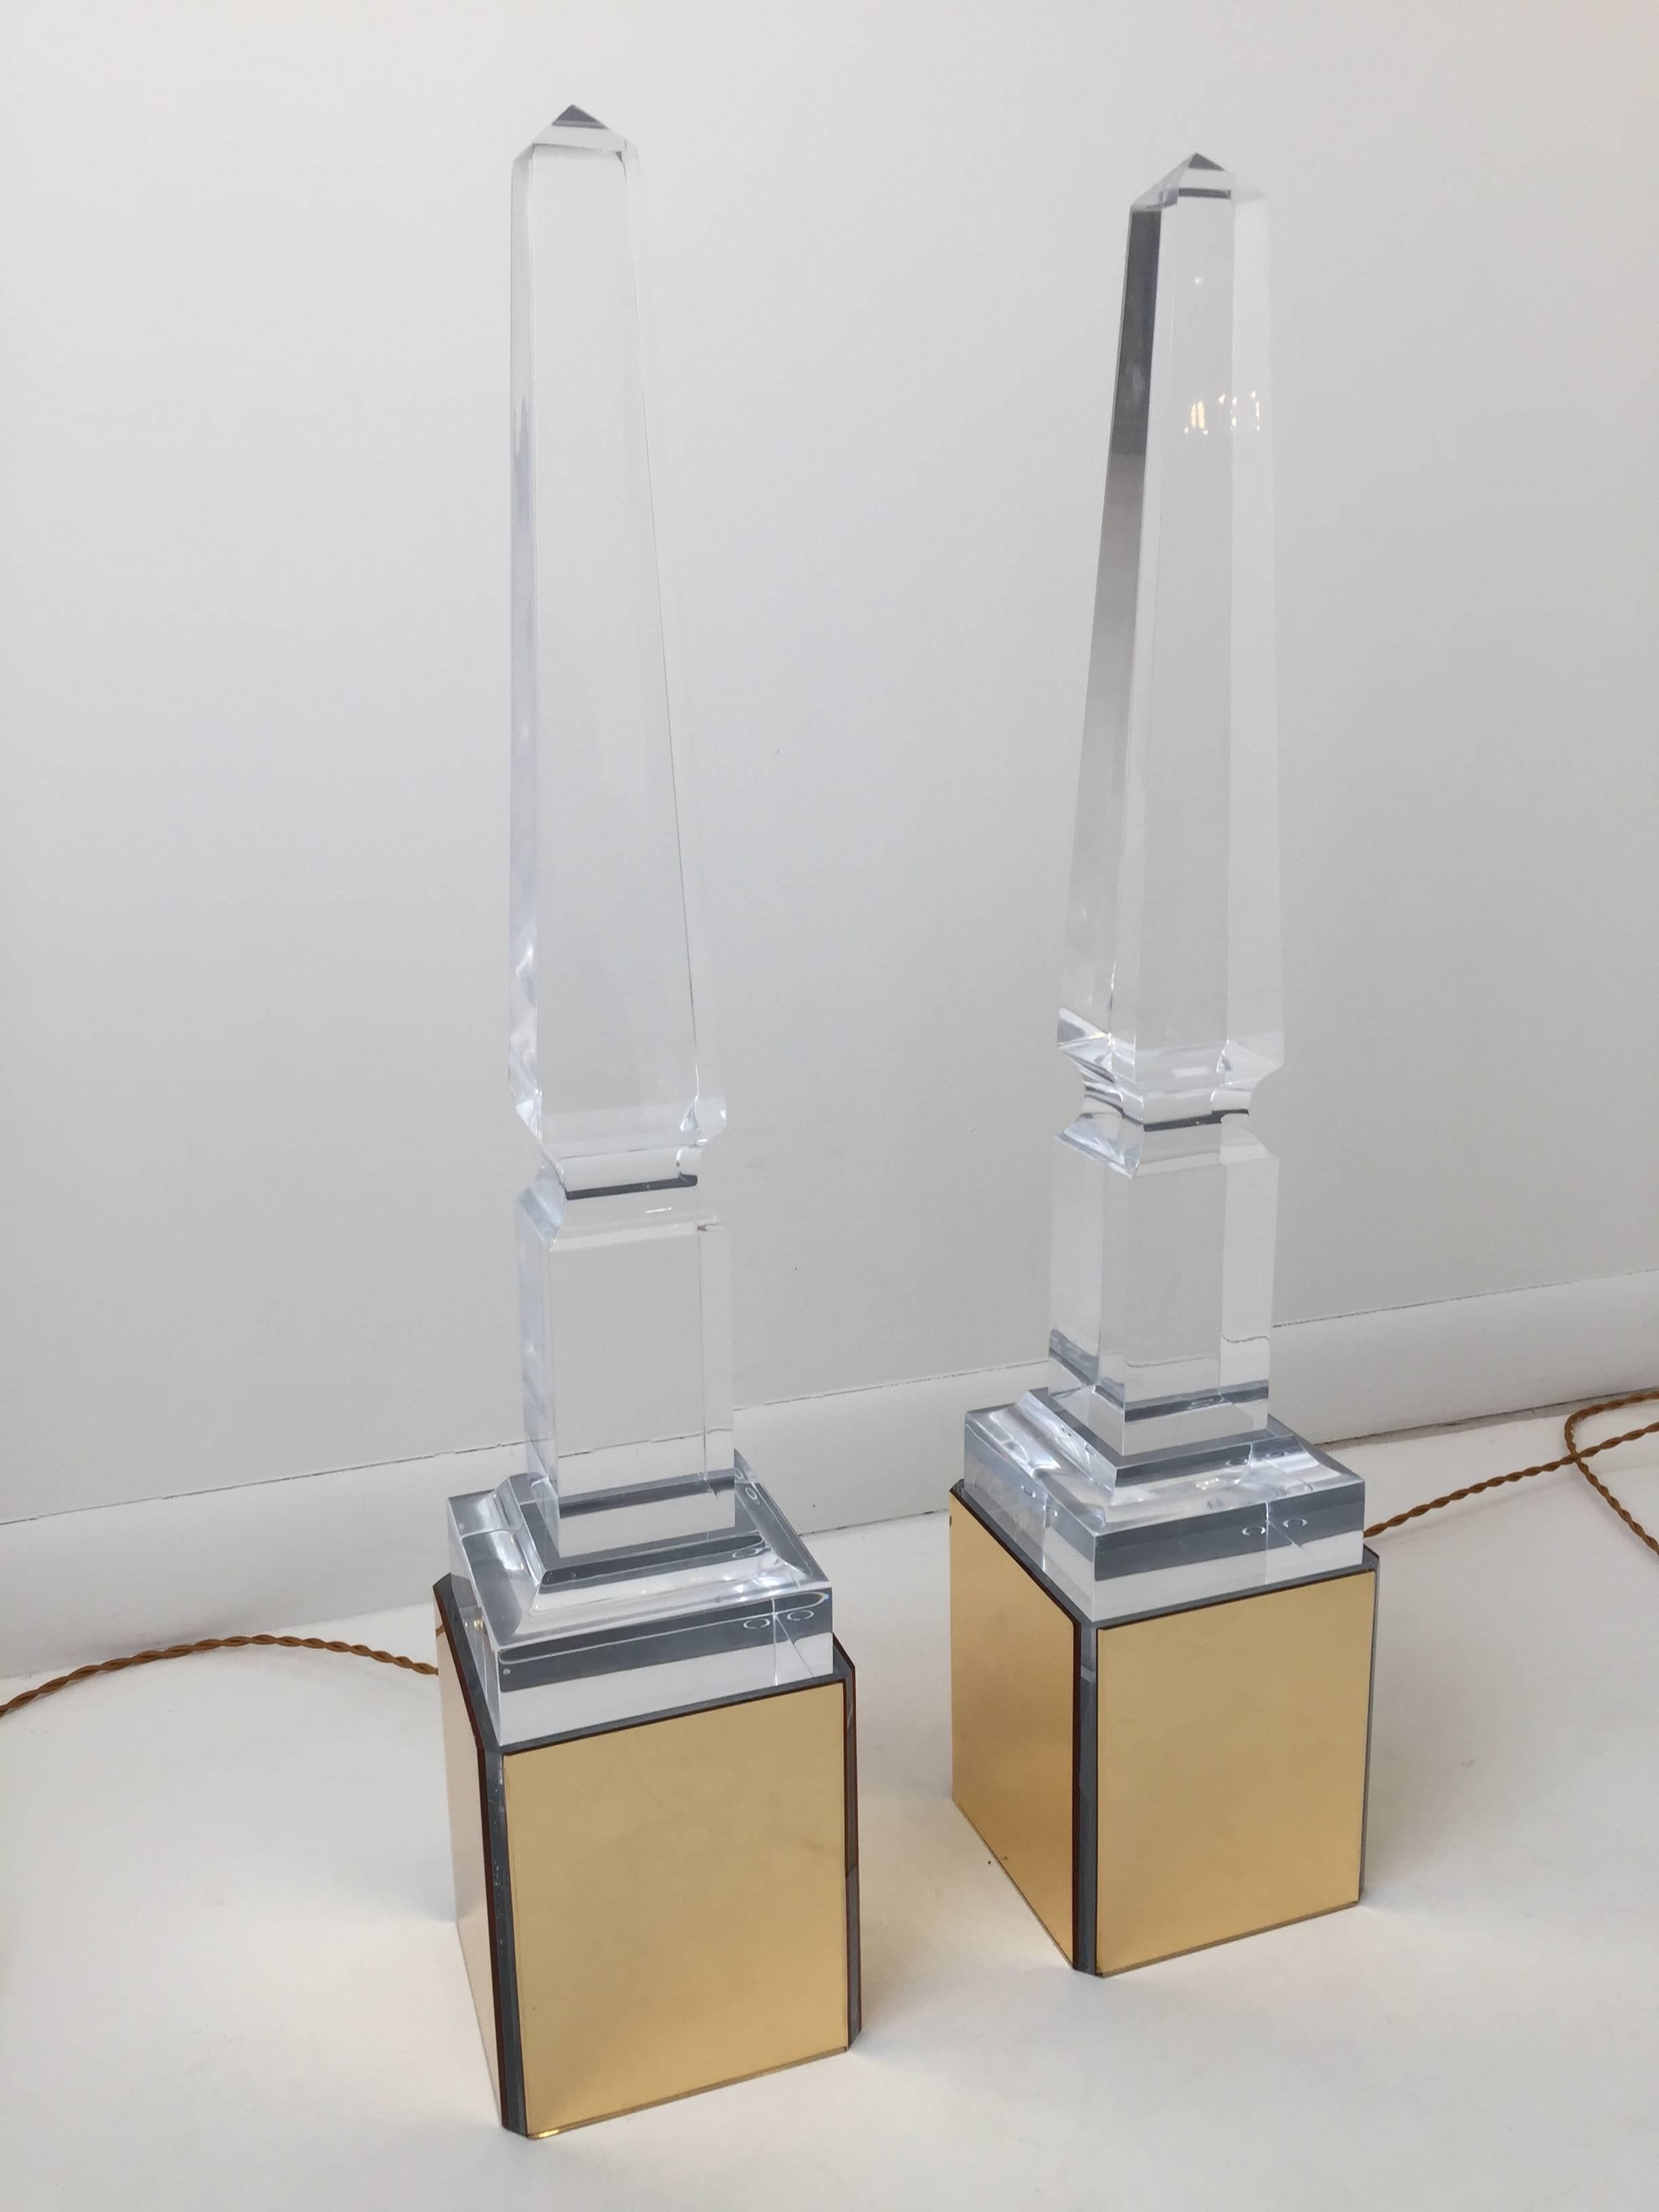 Truly unique all acrylic obelisk monuments on a Lucite light stand which lights from underneath. Provides great ambient lighting through the clarity of the obelisk.